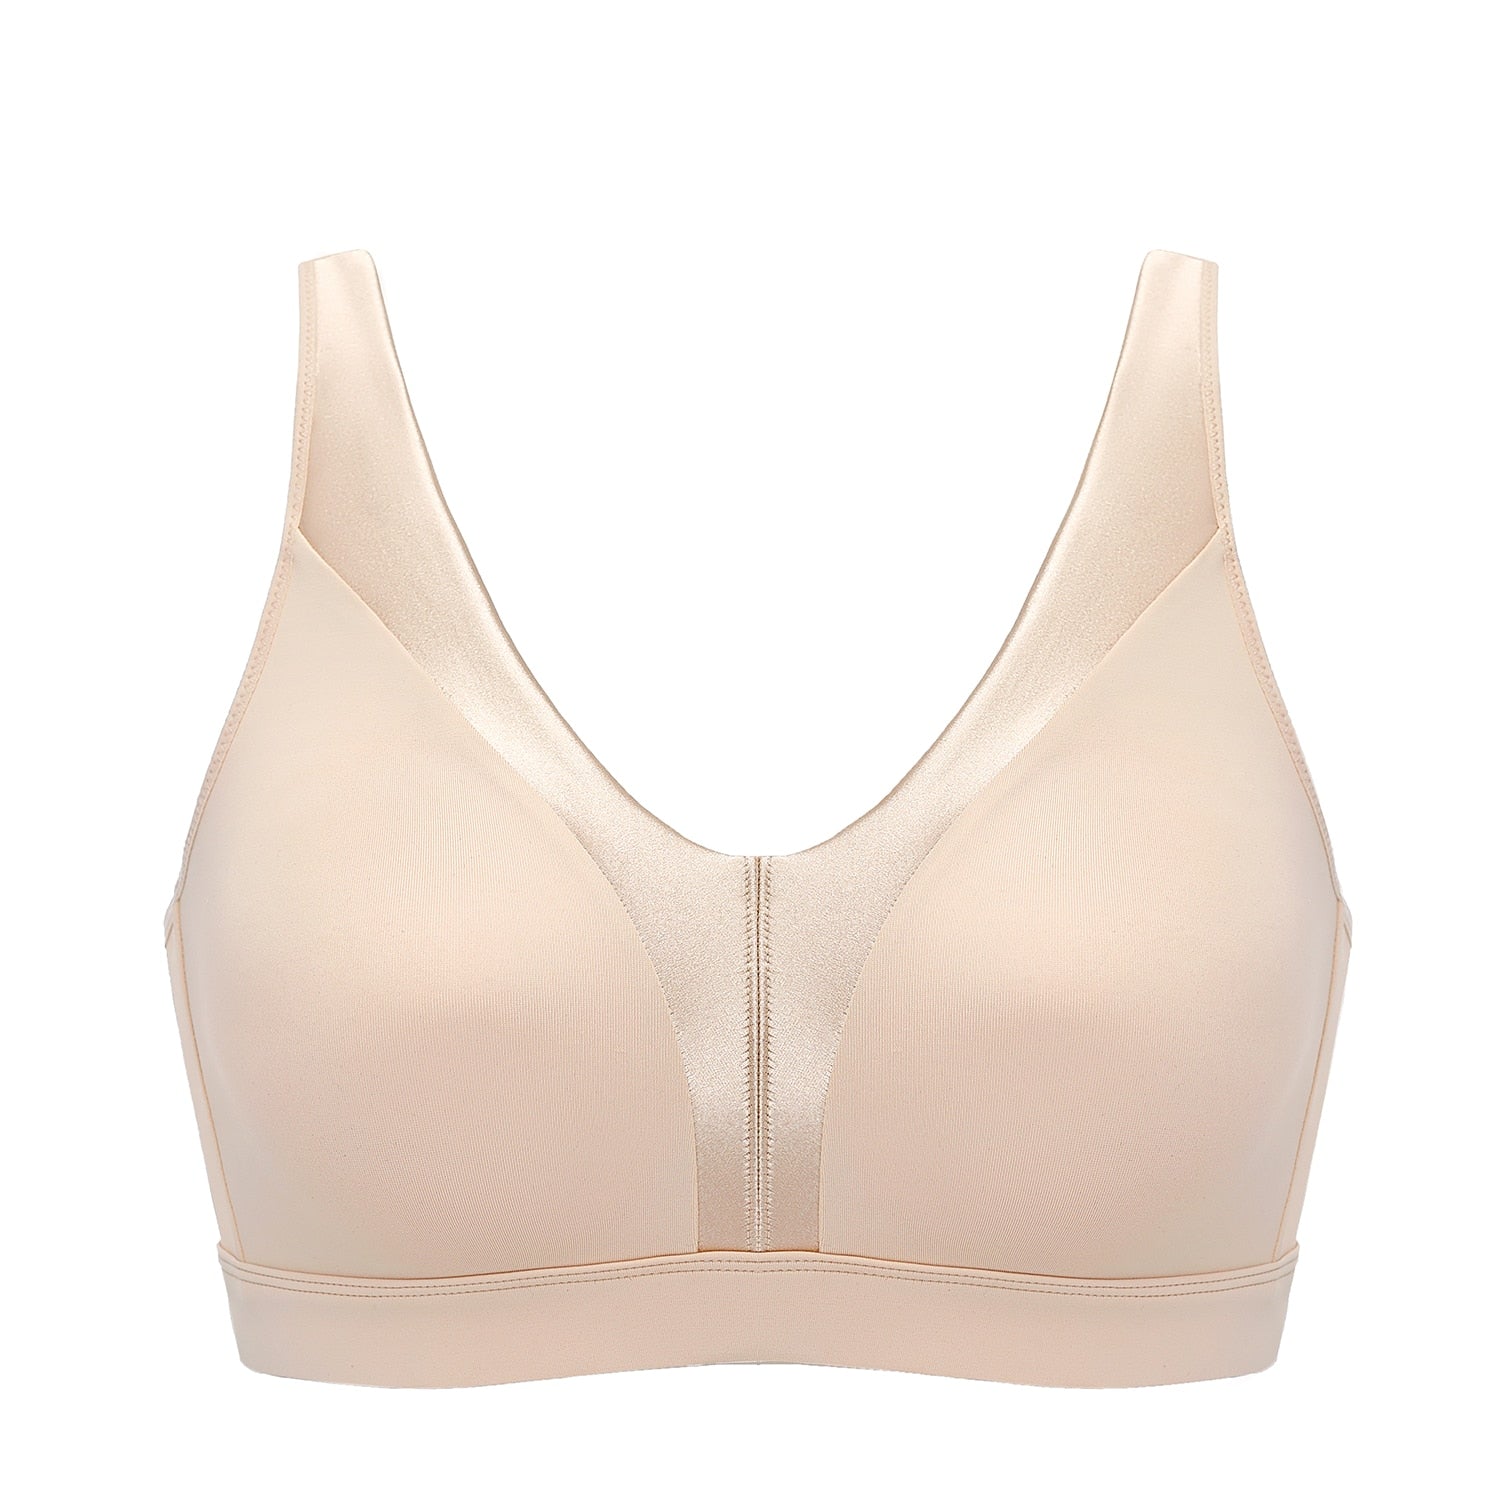 NEW Wireless Smooth Bra - Full Coverage & Comfortable! Neutral Colors